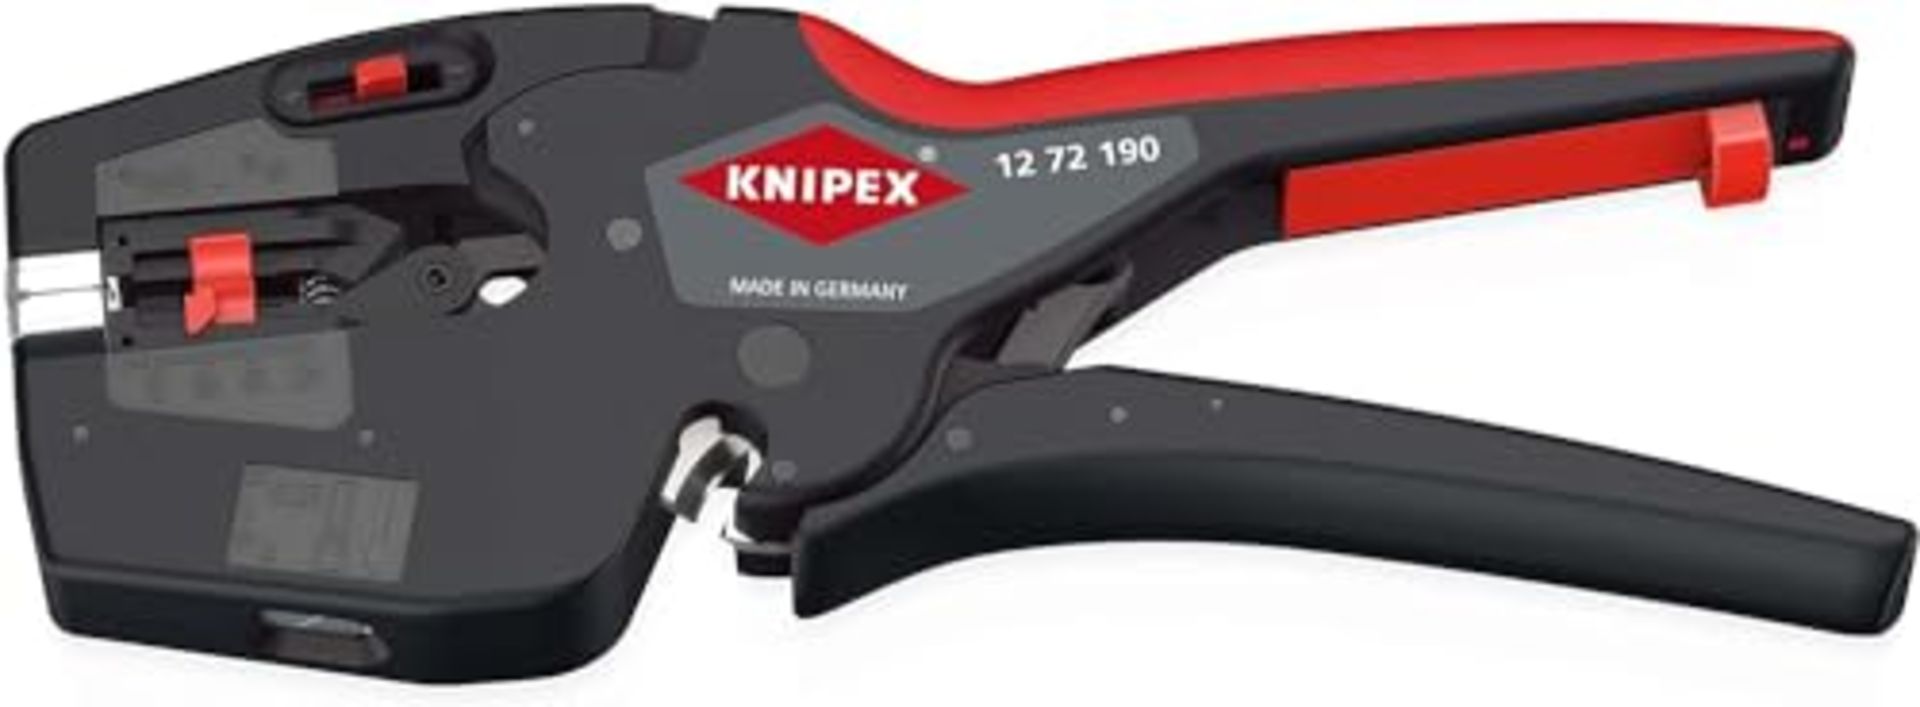 RRP £94.00 Knipex NexStrip Electrician Multi-Tool with Non-Slip Plastic Handles 190 mm 12 72 190